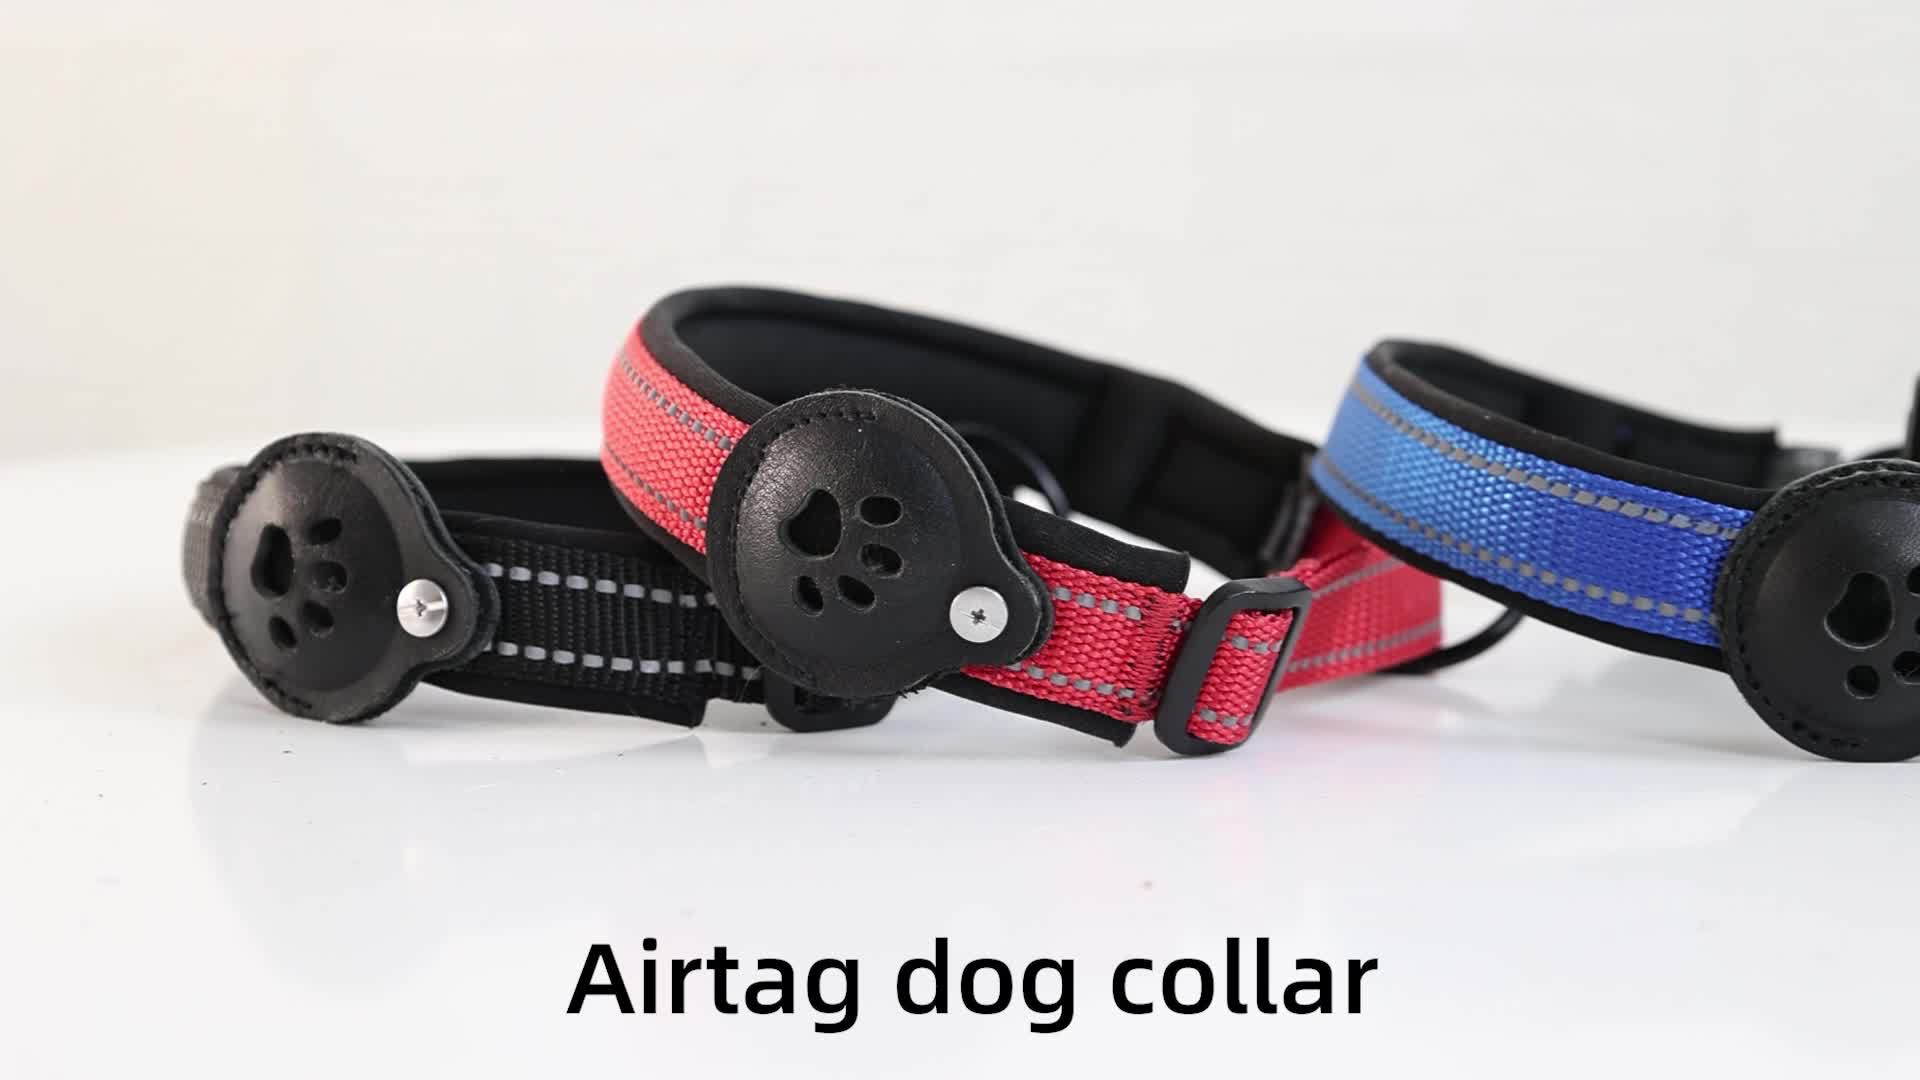 Genuine Leather Dog Collar with air tag holder. - Pet Colony USA